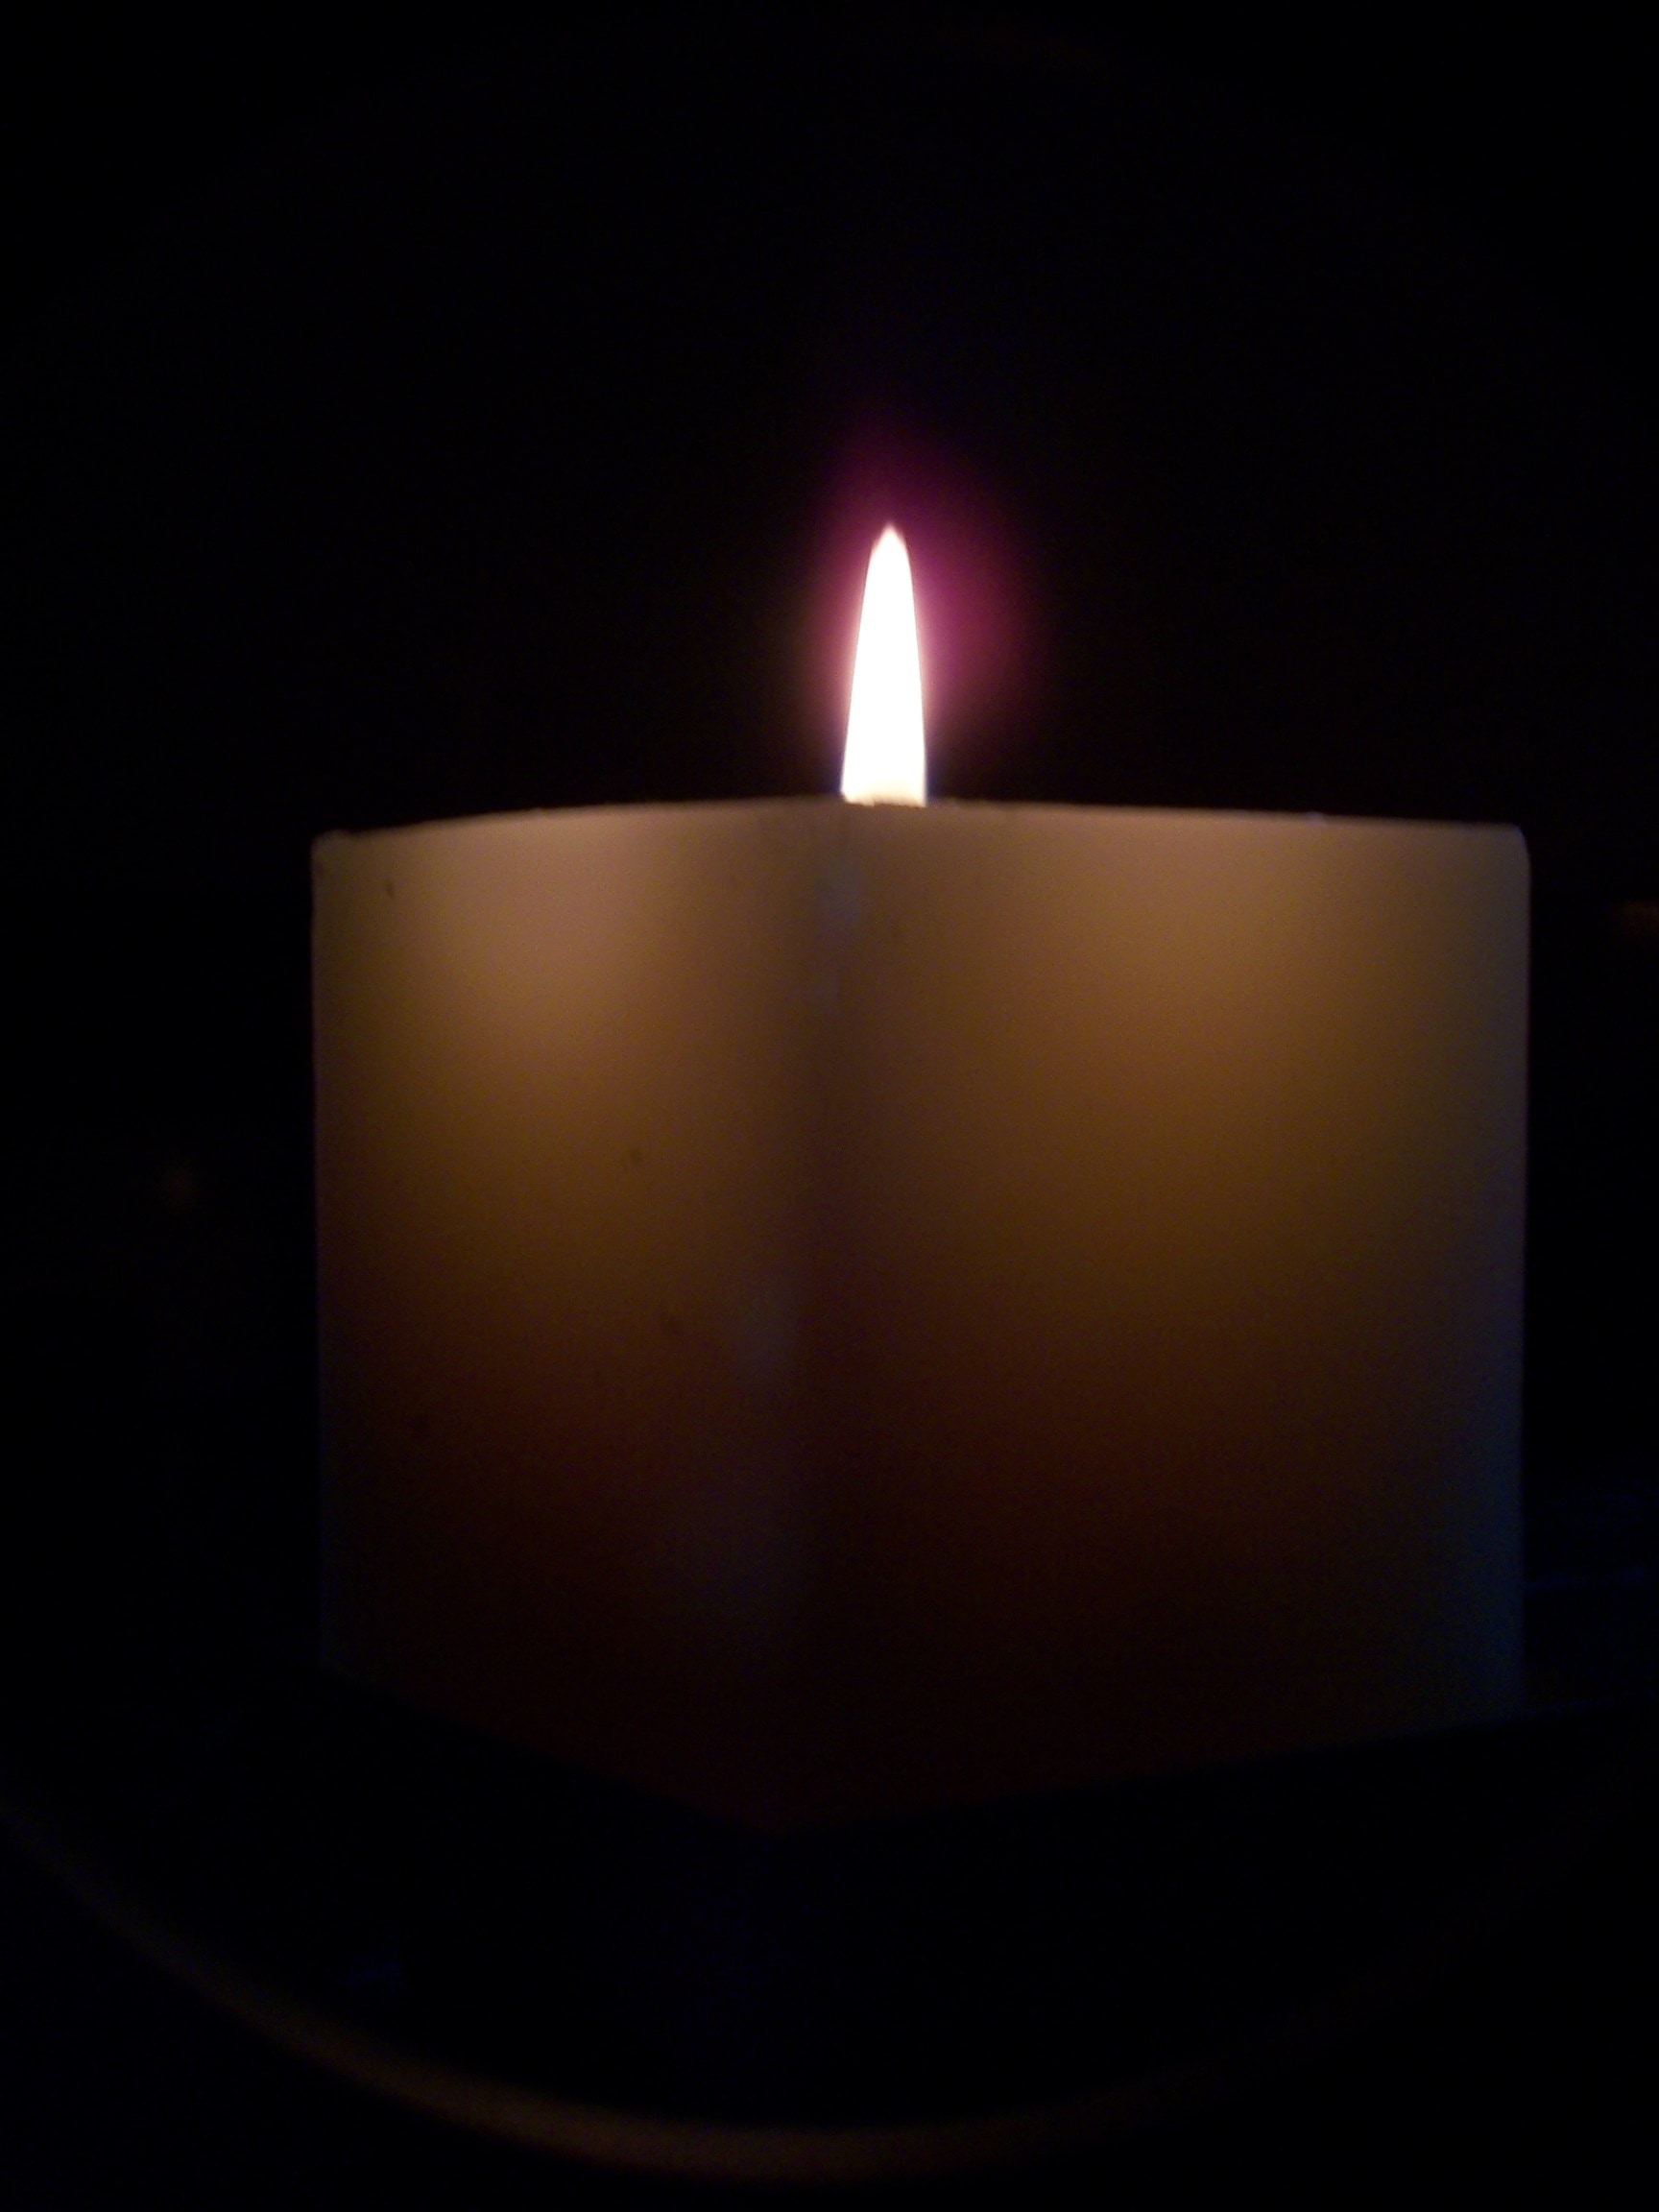 close up photo of lighted candle